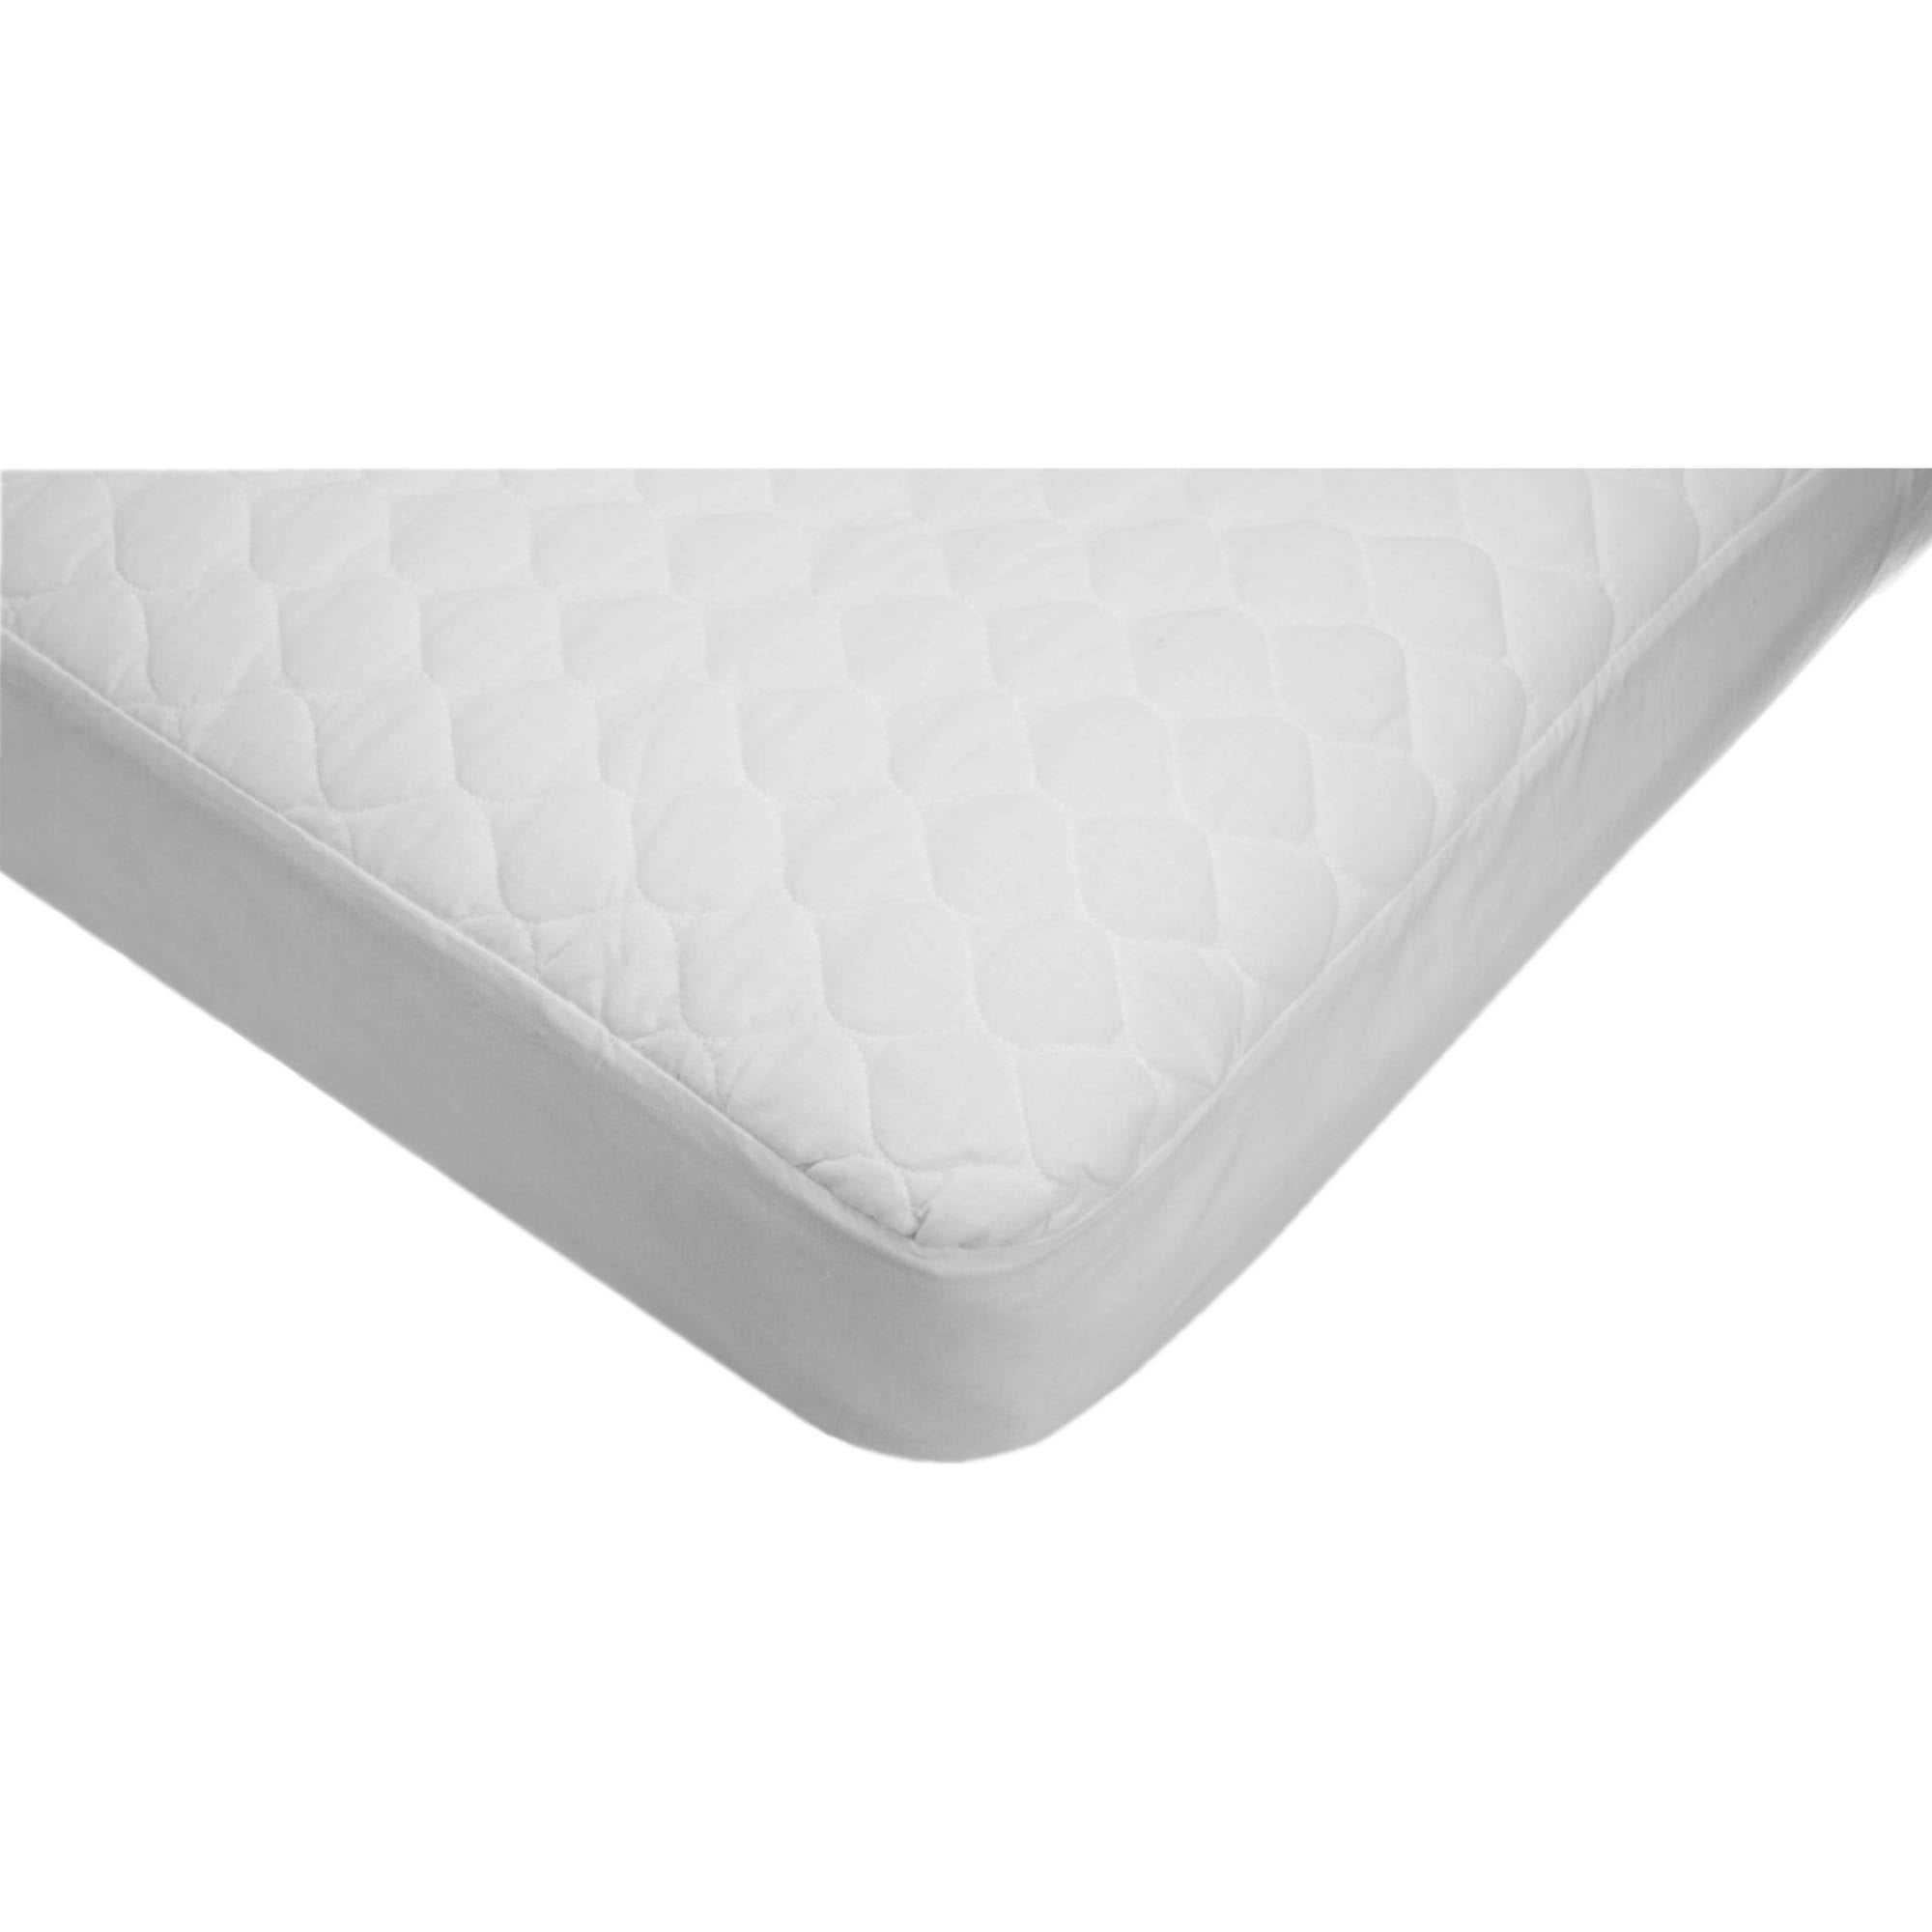 Crib American Baby Company Ultra Soft Waterproof Fitted Quilted Mattress Pad Cover 